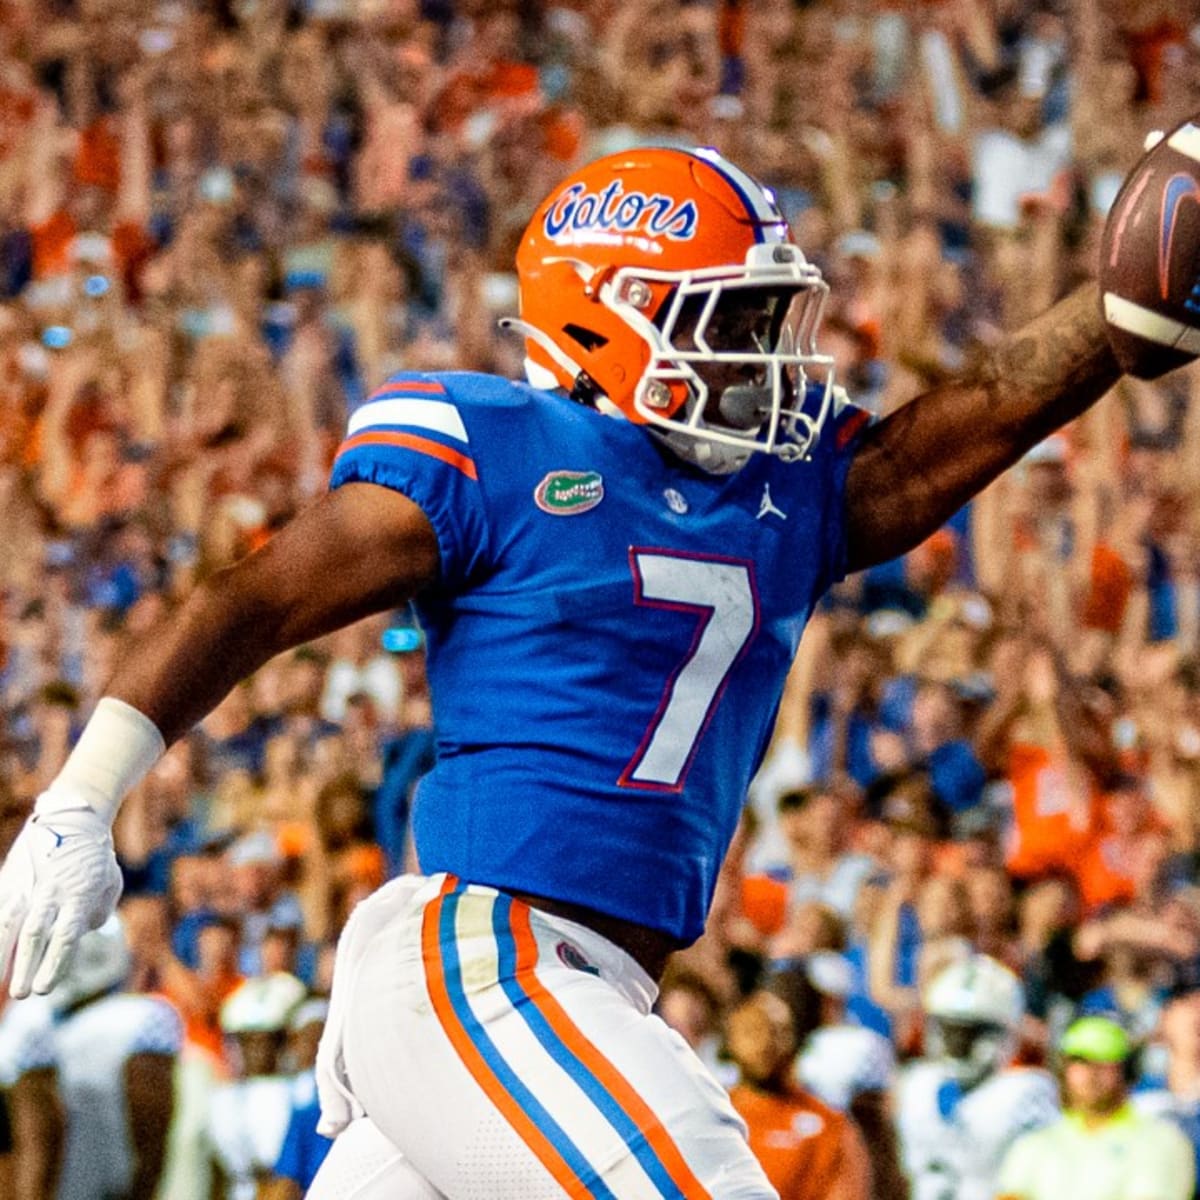 Breaking: Gators have Lose Backfield Star To The Transfer Portal